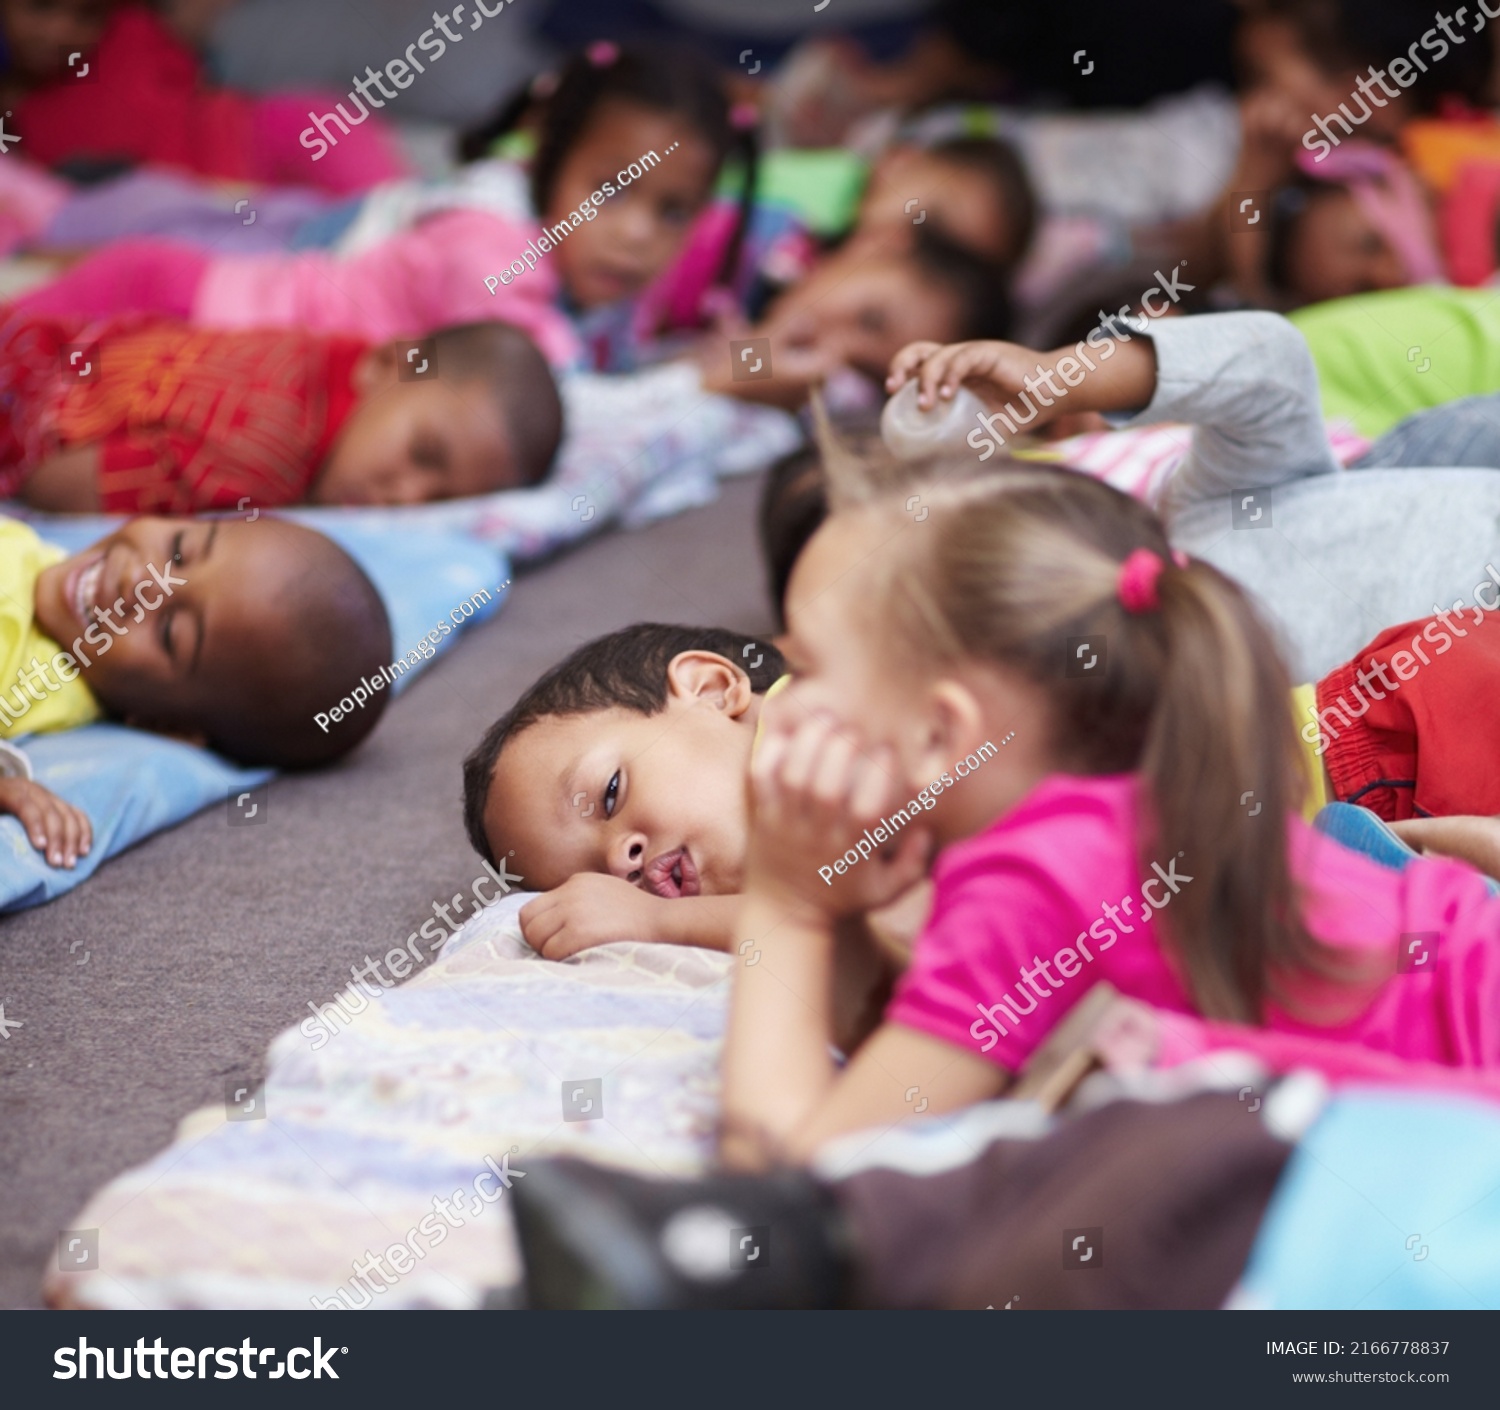 Nap-time. Preschool children all lying down and getting ready for bed. #2166778837